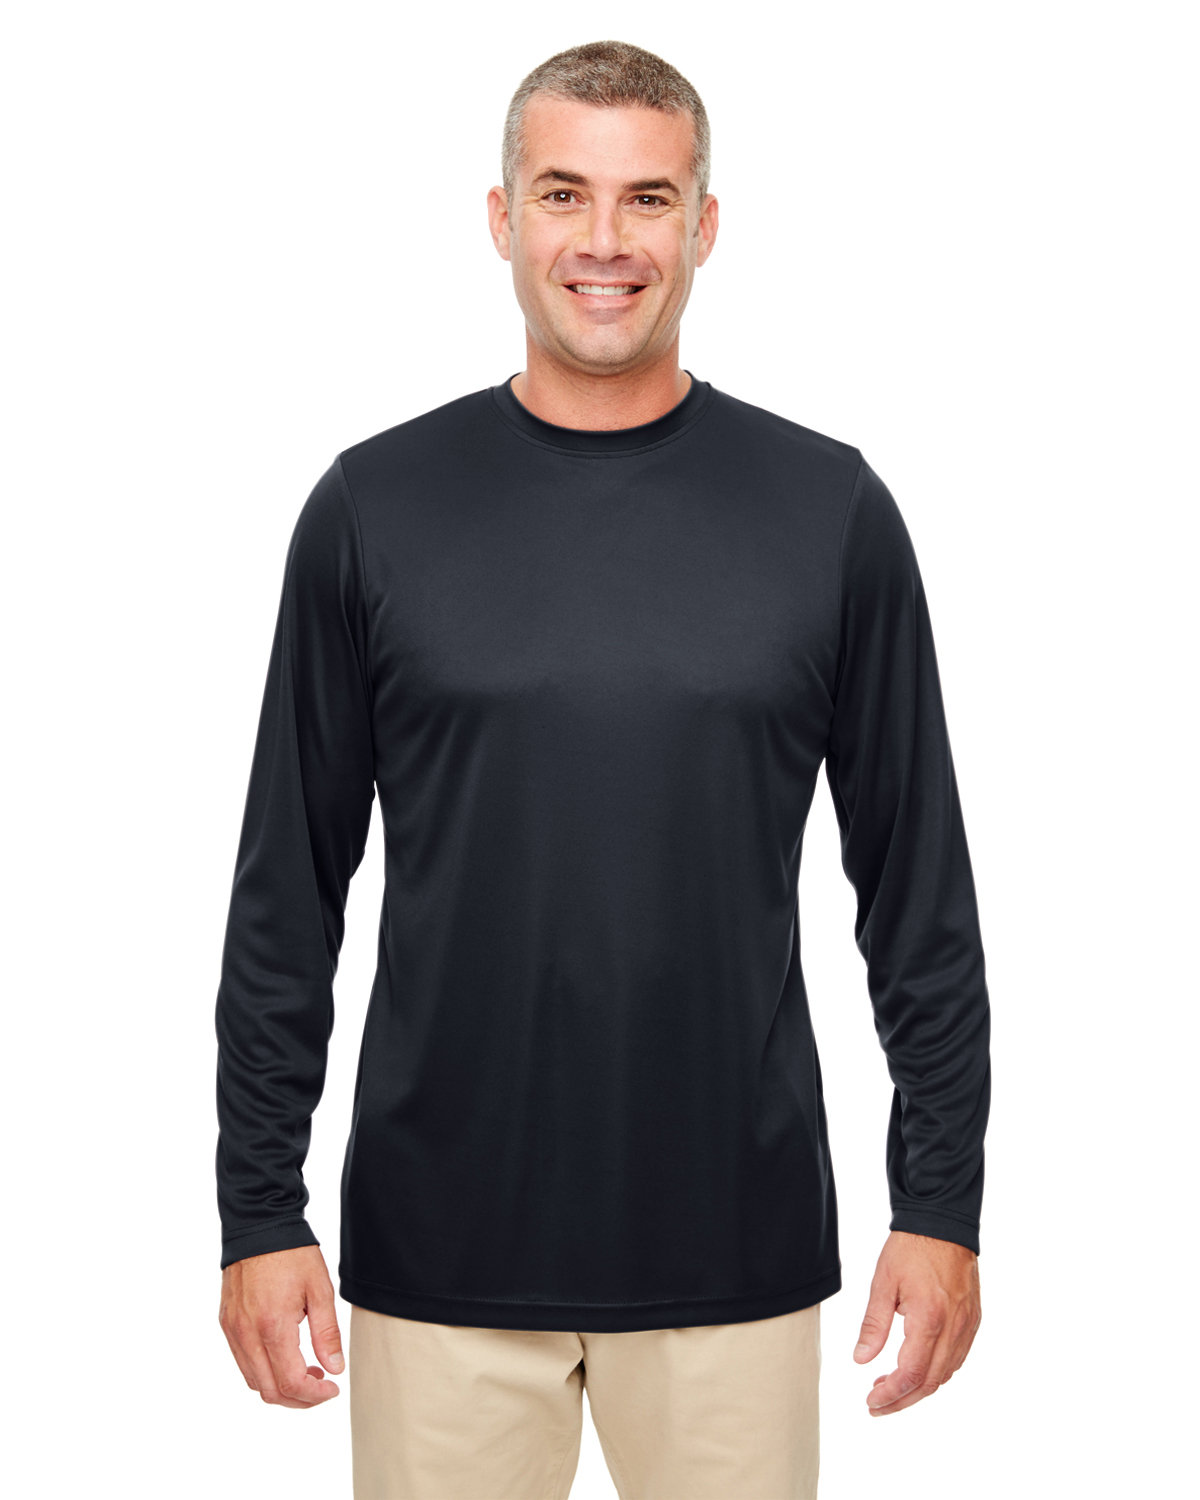 Mens Cool & Dry Performance Long-Sleeve Top-